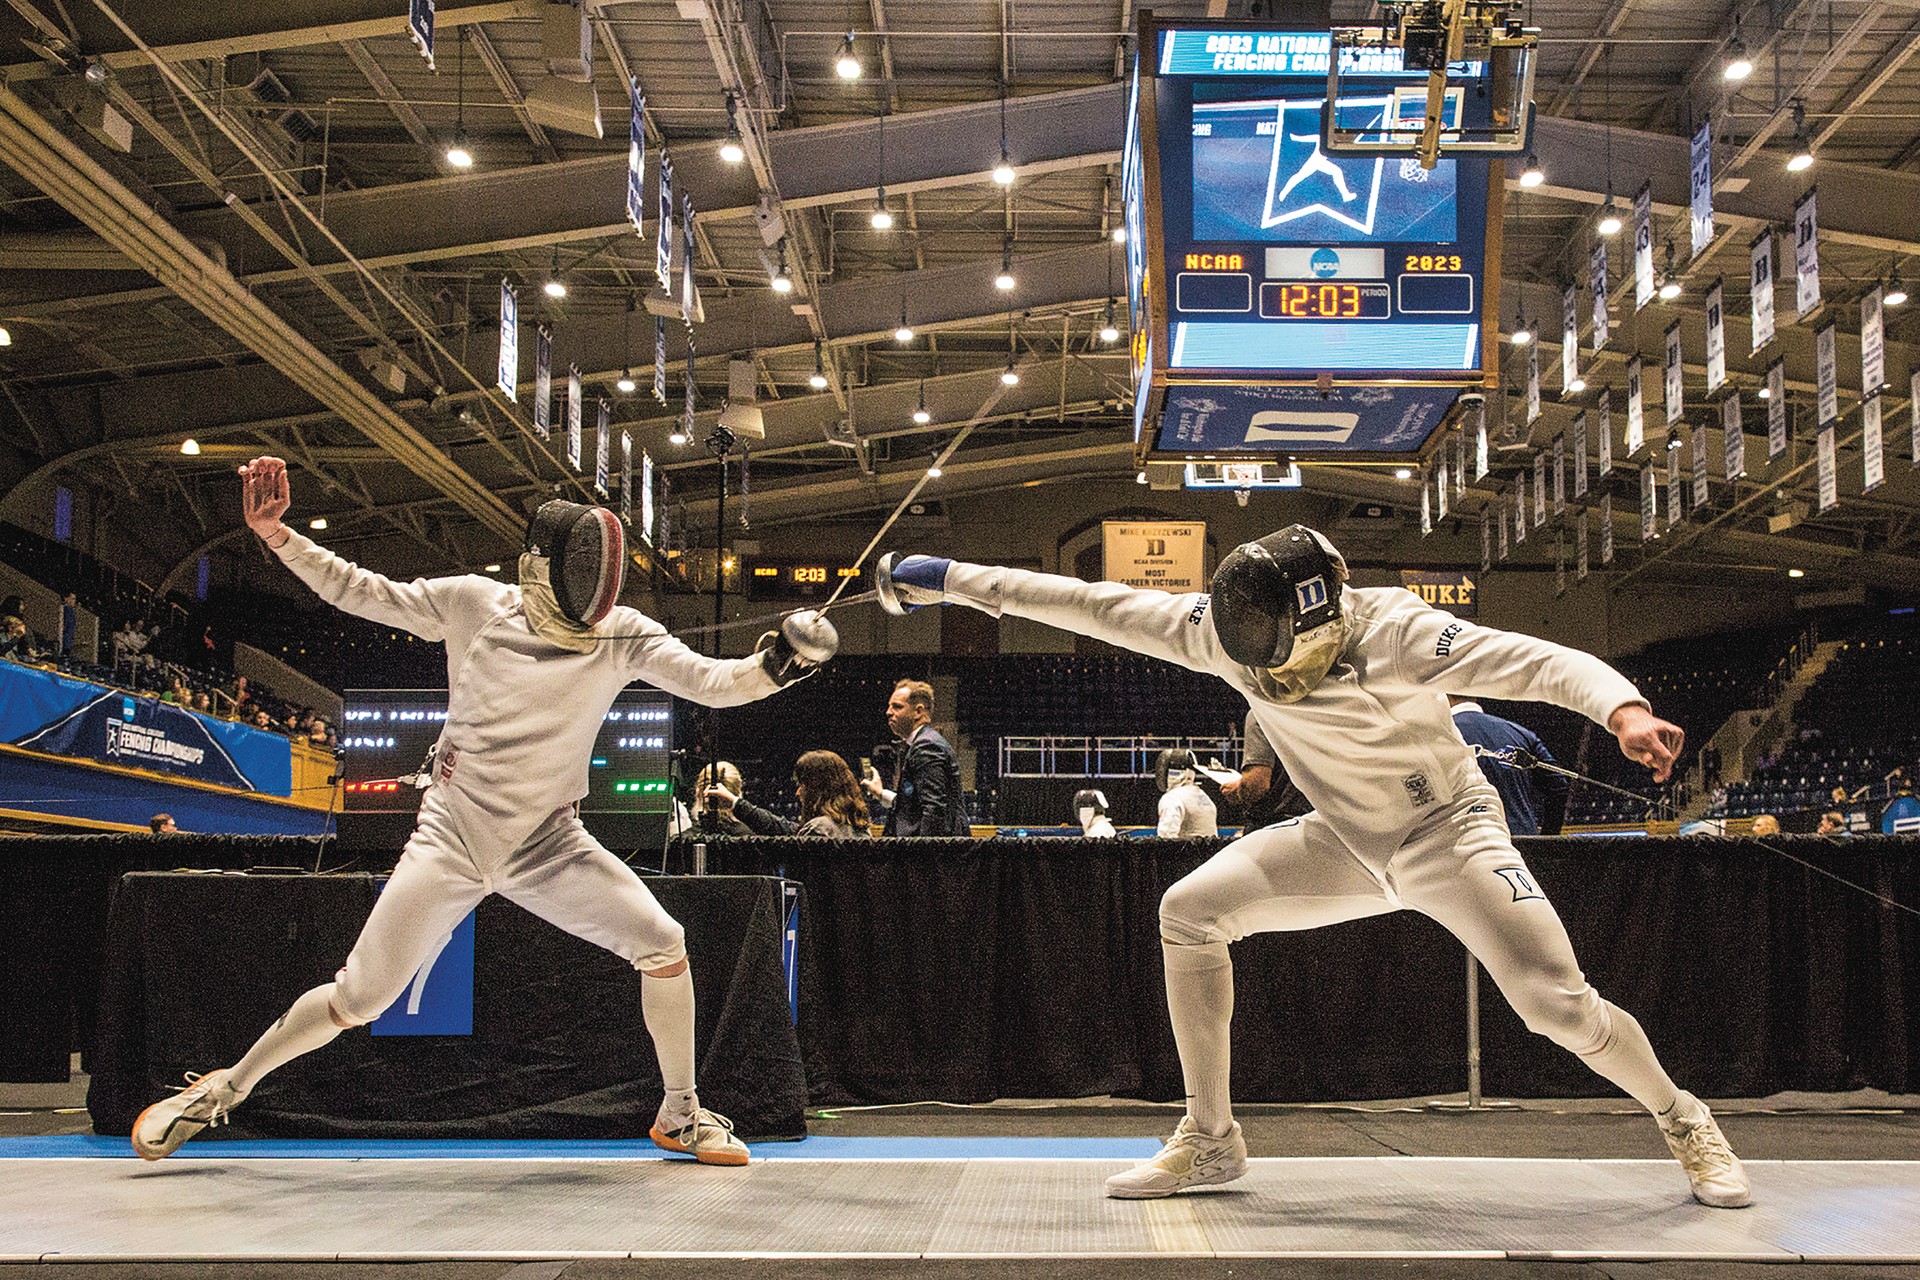 En garde — A bout unfolds at the NCAA Fencing Championships, held in March at Cameron Indoor Stadium. Duke’s team placed 9th in head coach Alex Beguinet’s 38th and final season.